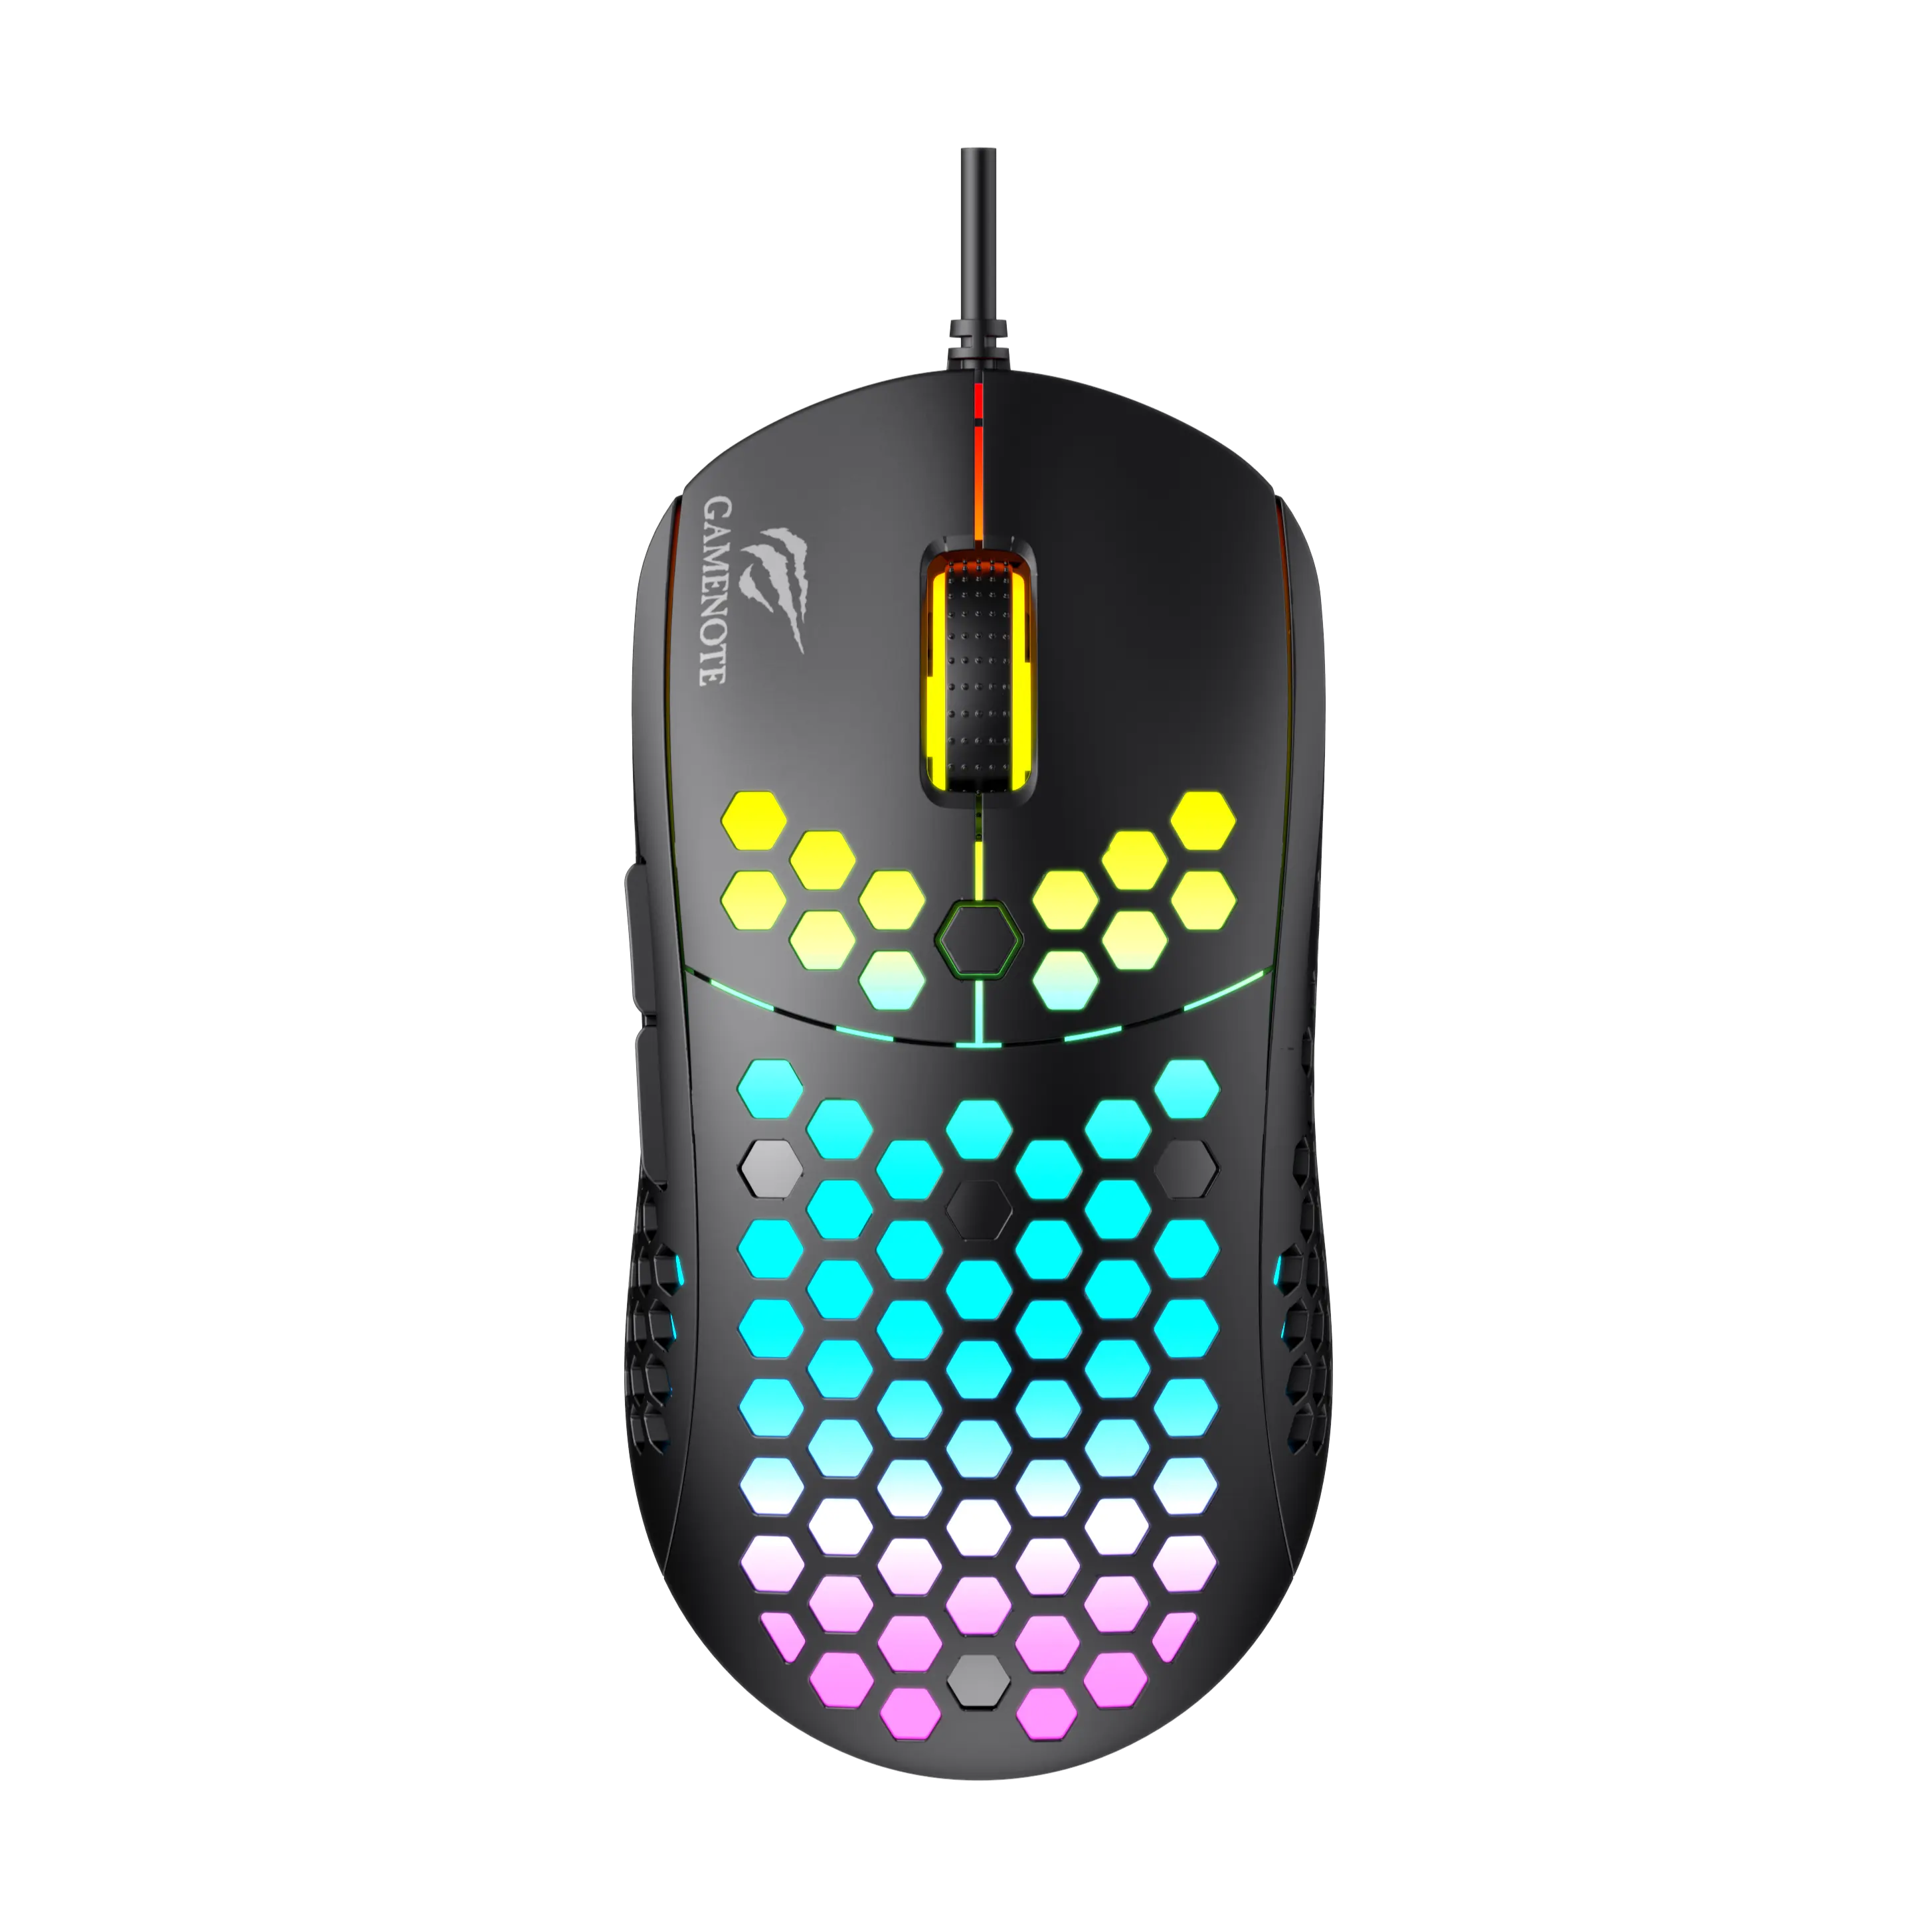 Havit MS1032 Wireless Gaming mouse 6400DPI built-in battery Rechargeable E-sports Computer Accessories Game Mouse Maus